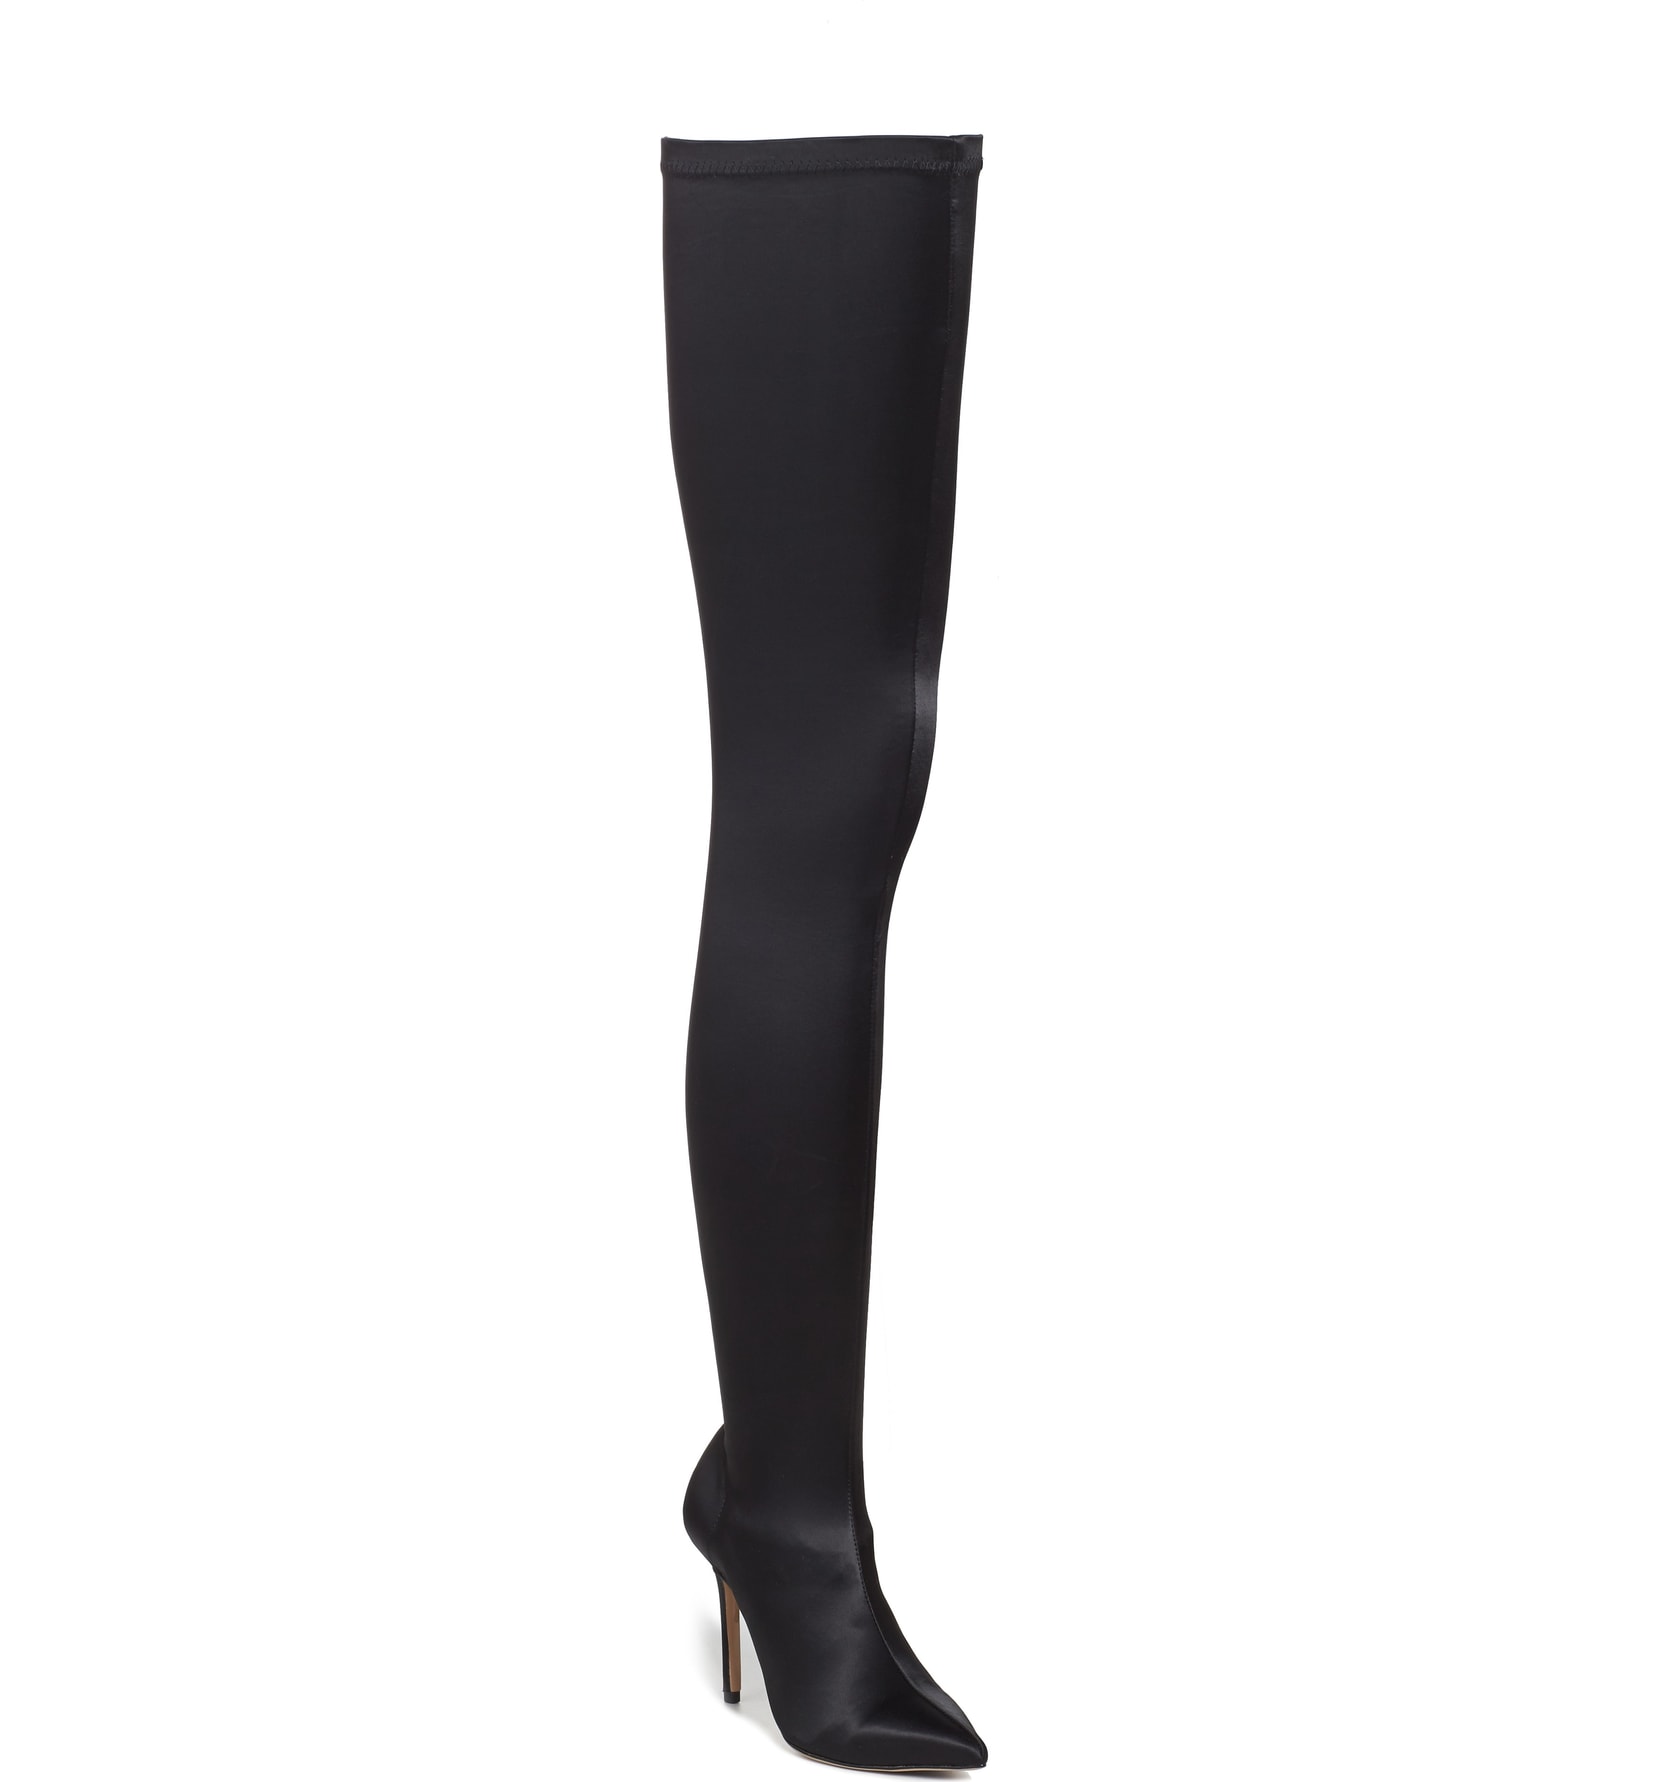 Shop Tony Bianco Thigh High Boots for 